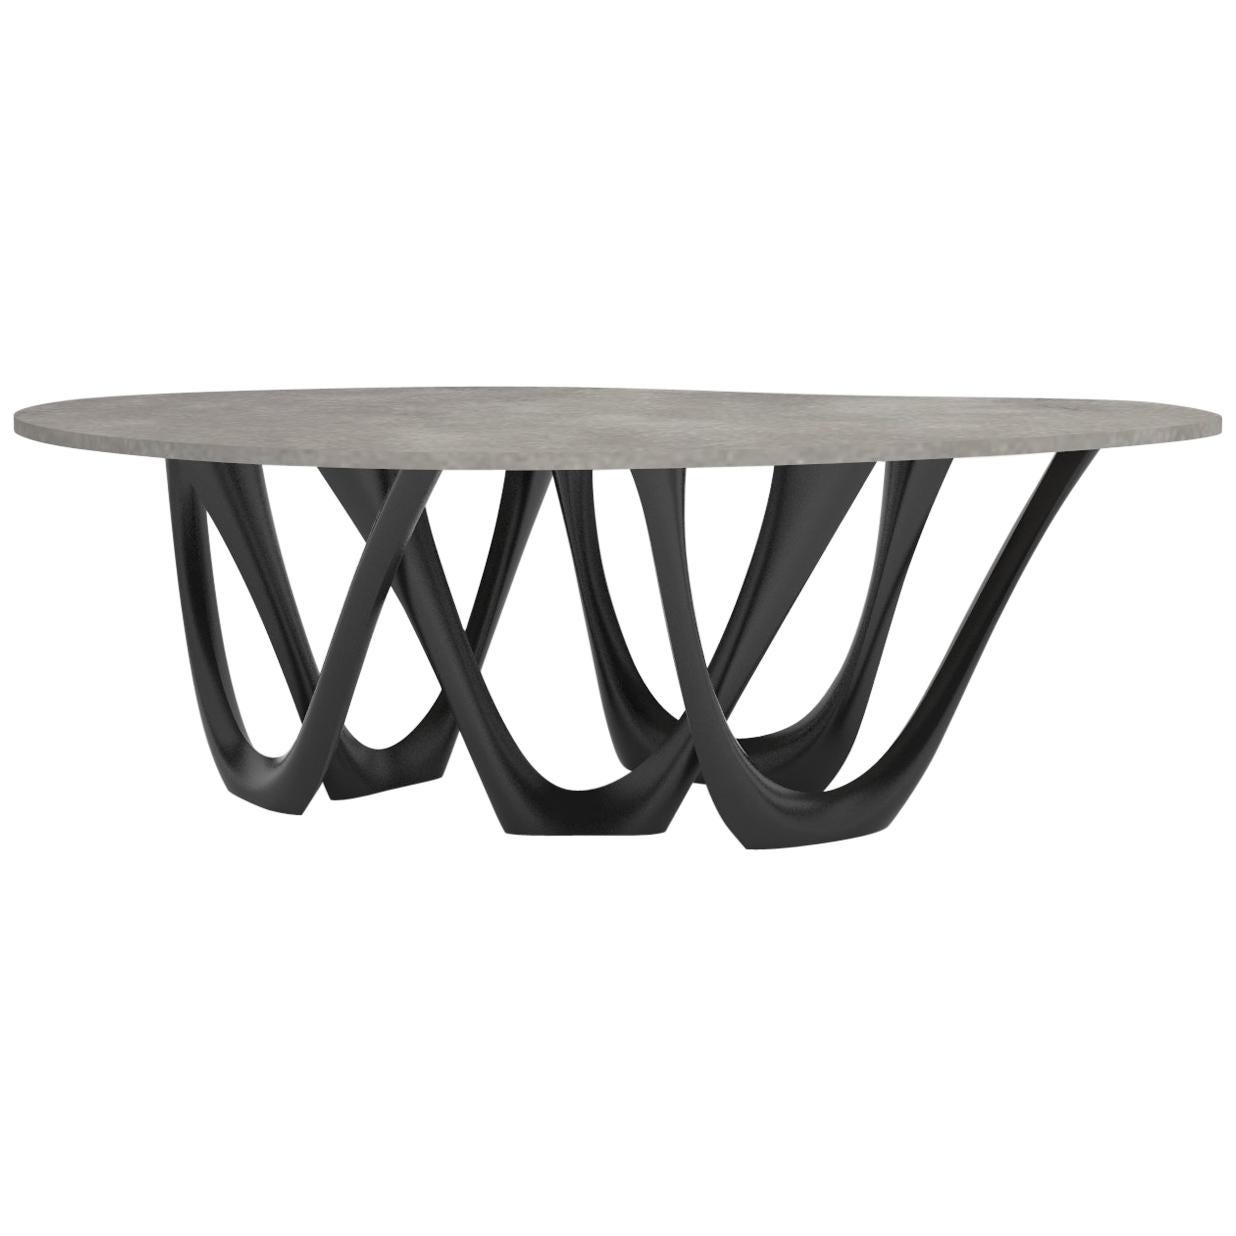 G-Table B+C in Powder-Coated Steel with Concrete Top by Zieta For Sale